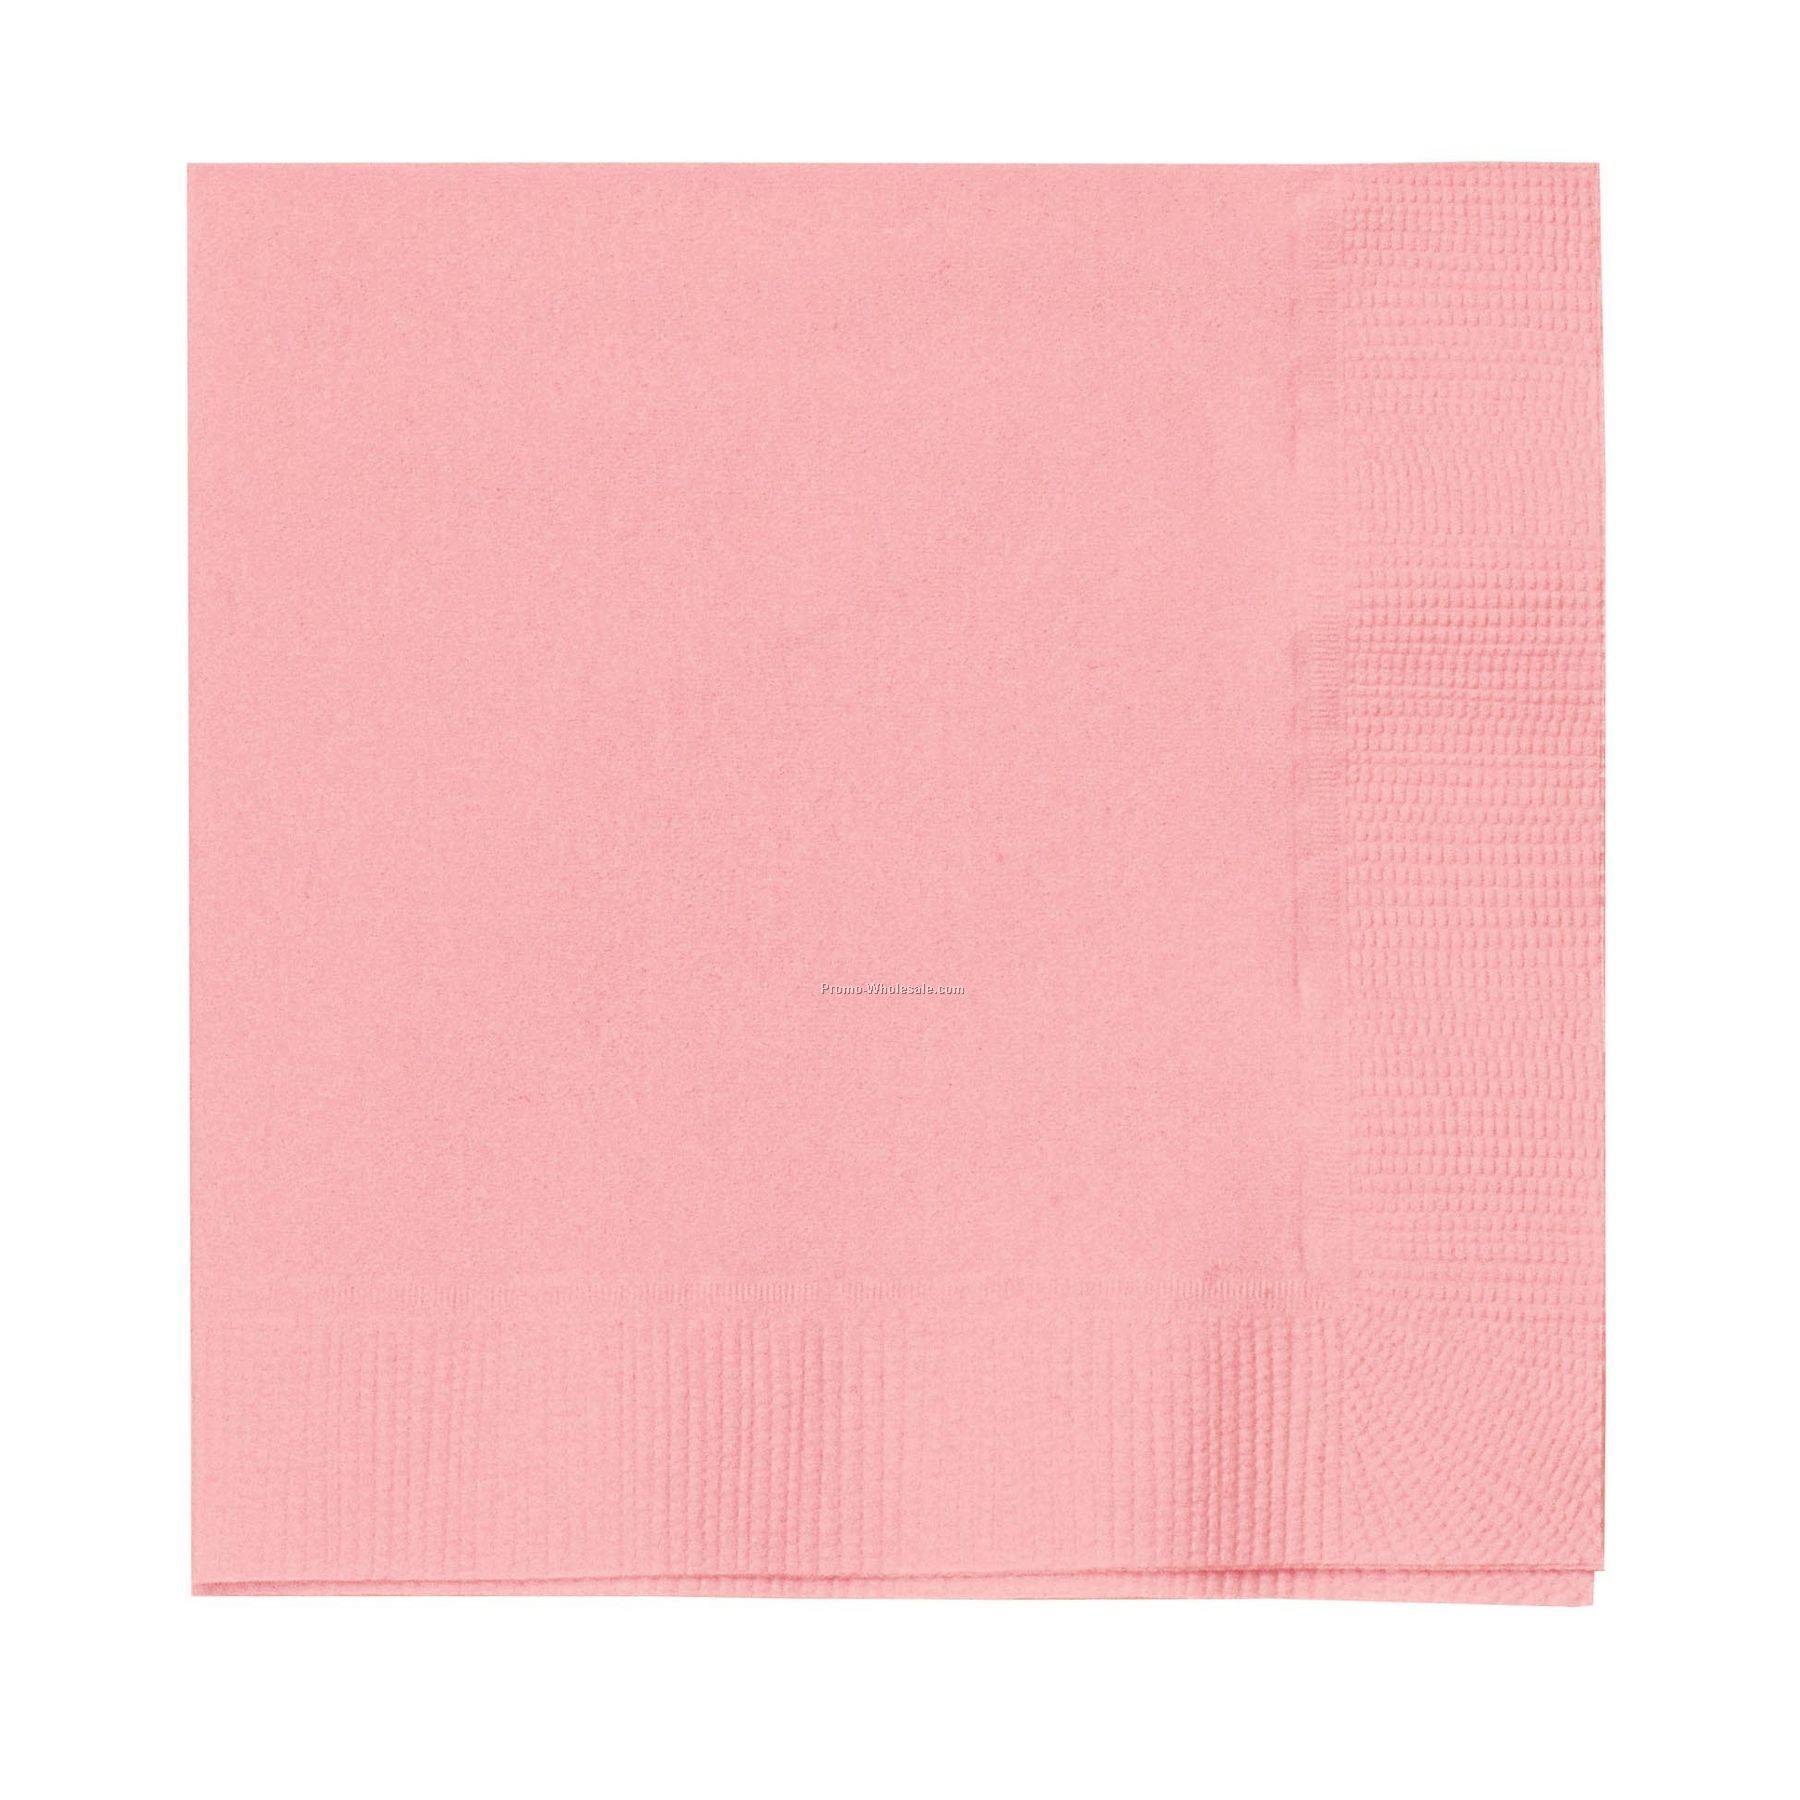 The 500 Line Colorware Classic Pink Luncheon Napkins